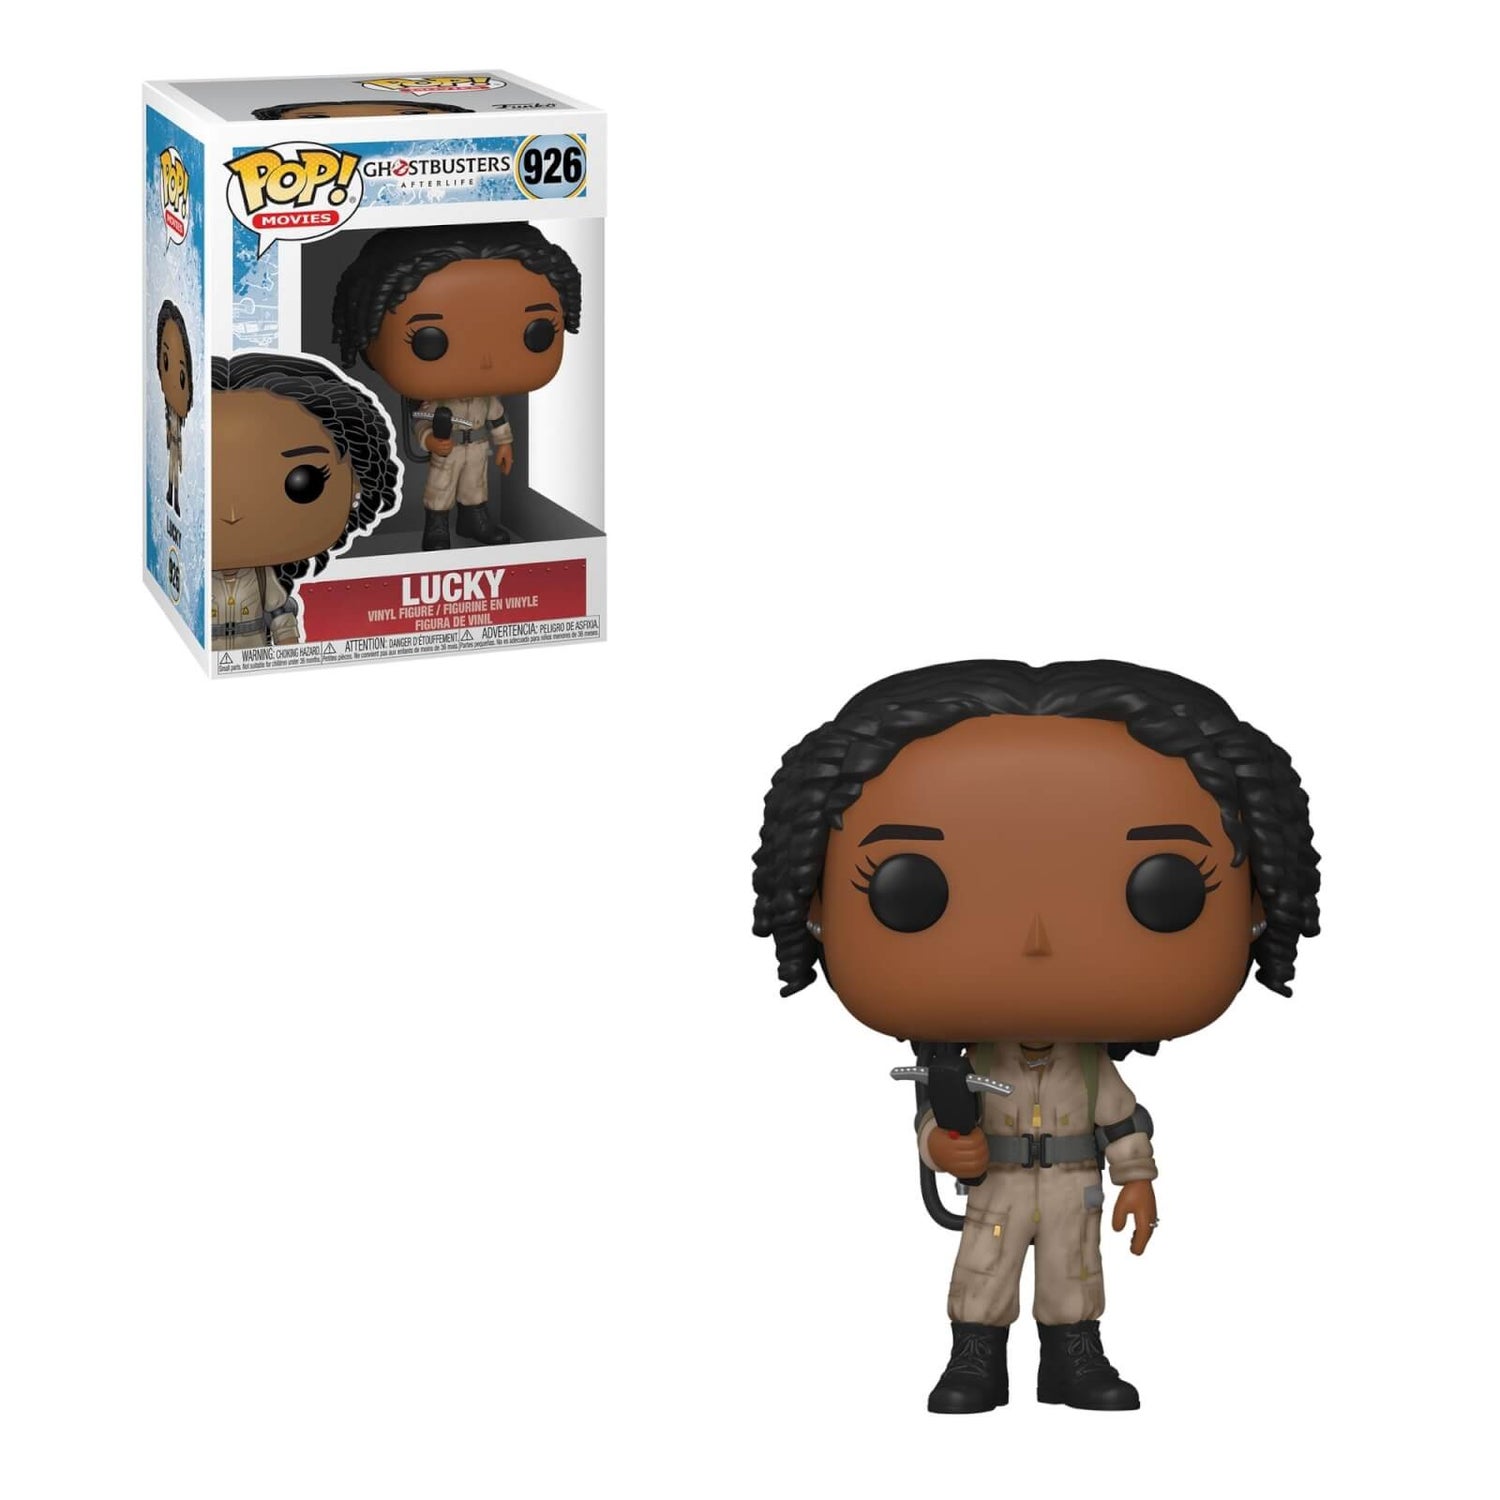 Ghostbusters: Afterlife Lucky Funko Pop! Vinyl